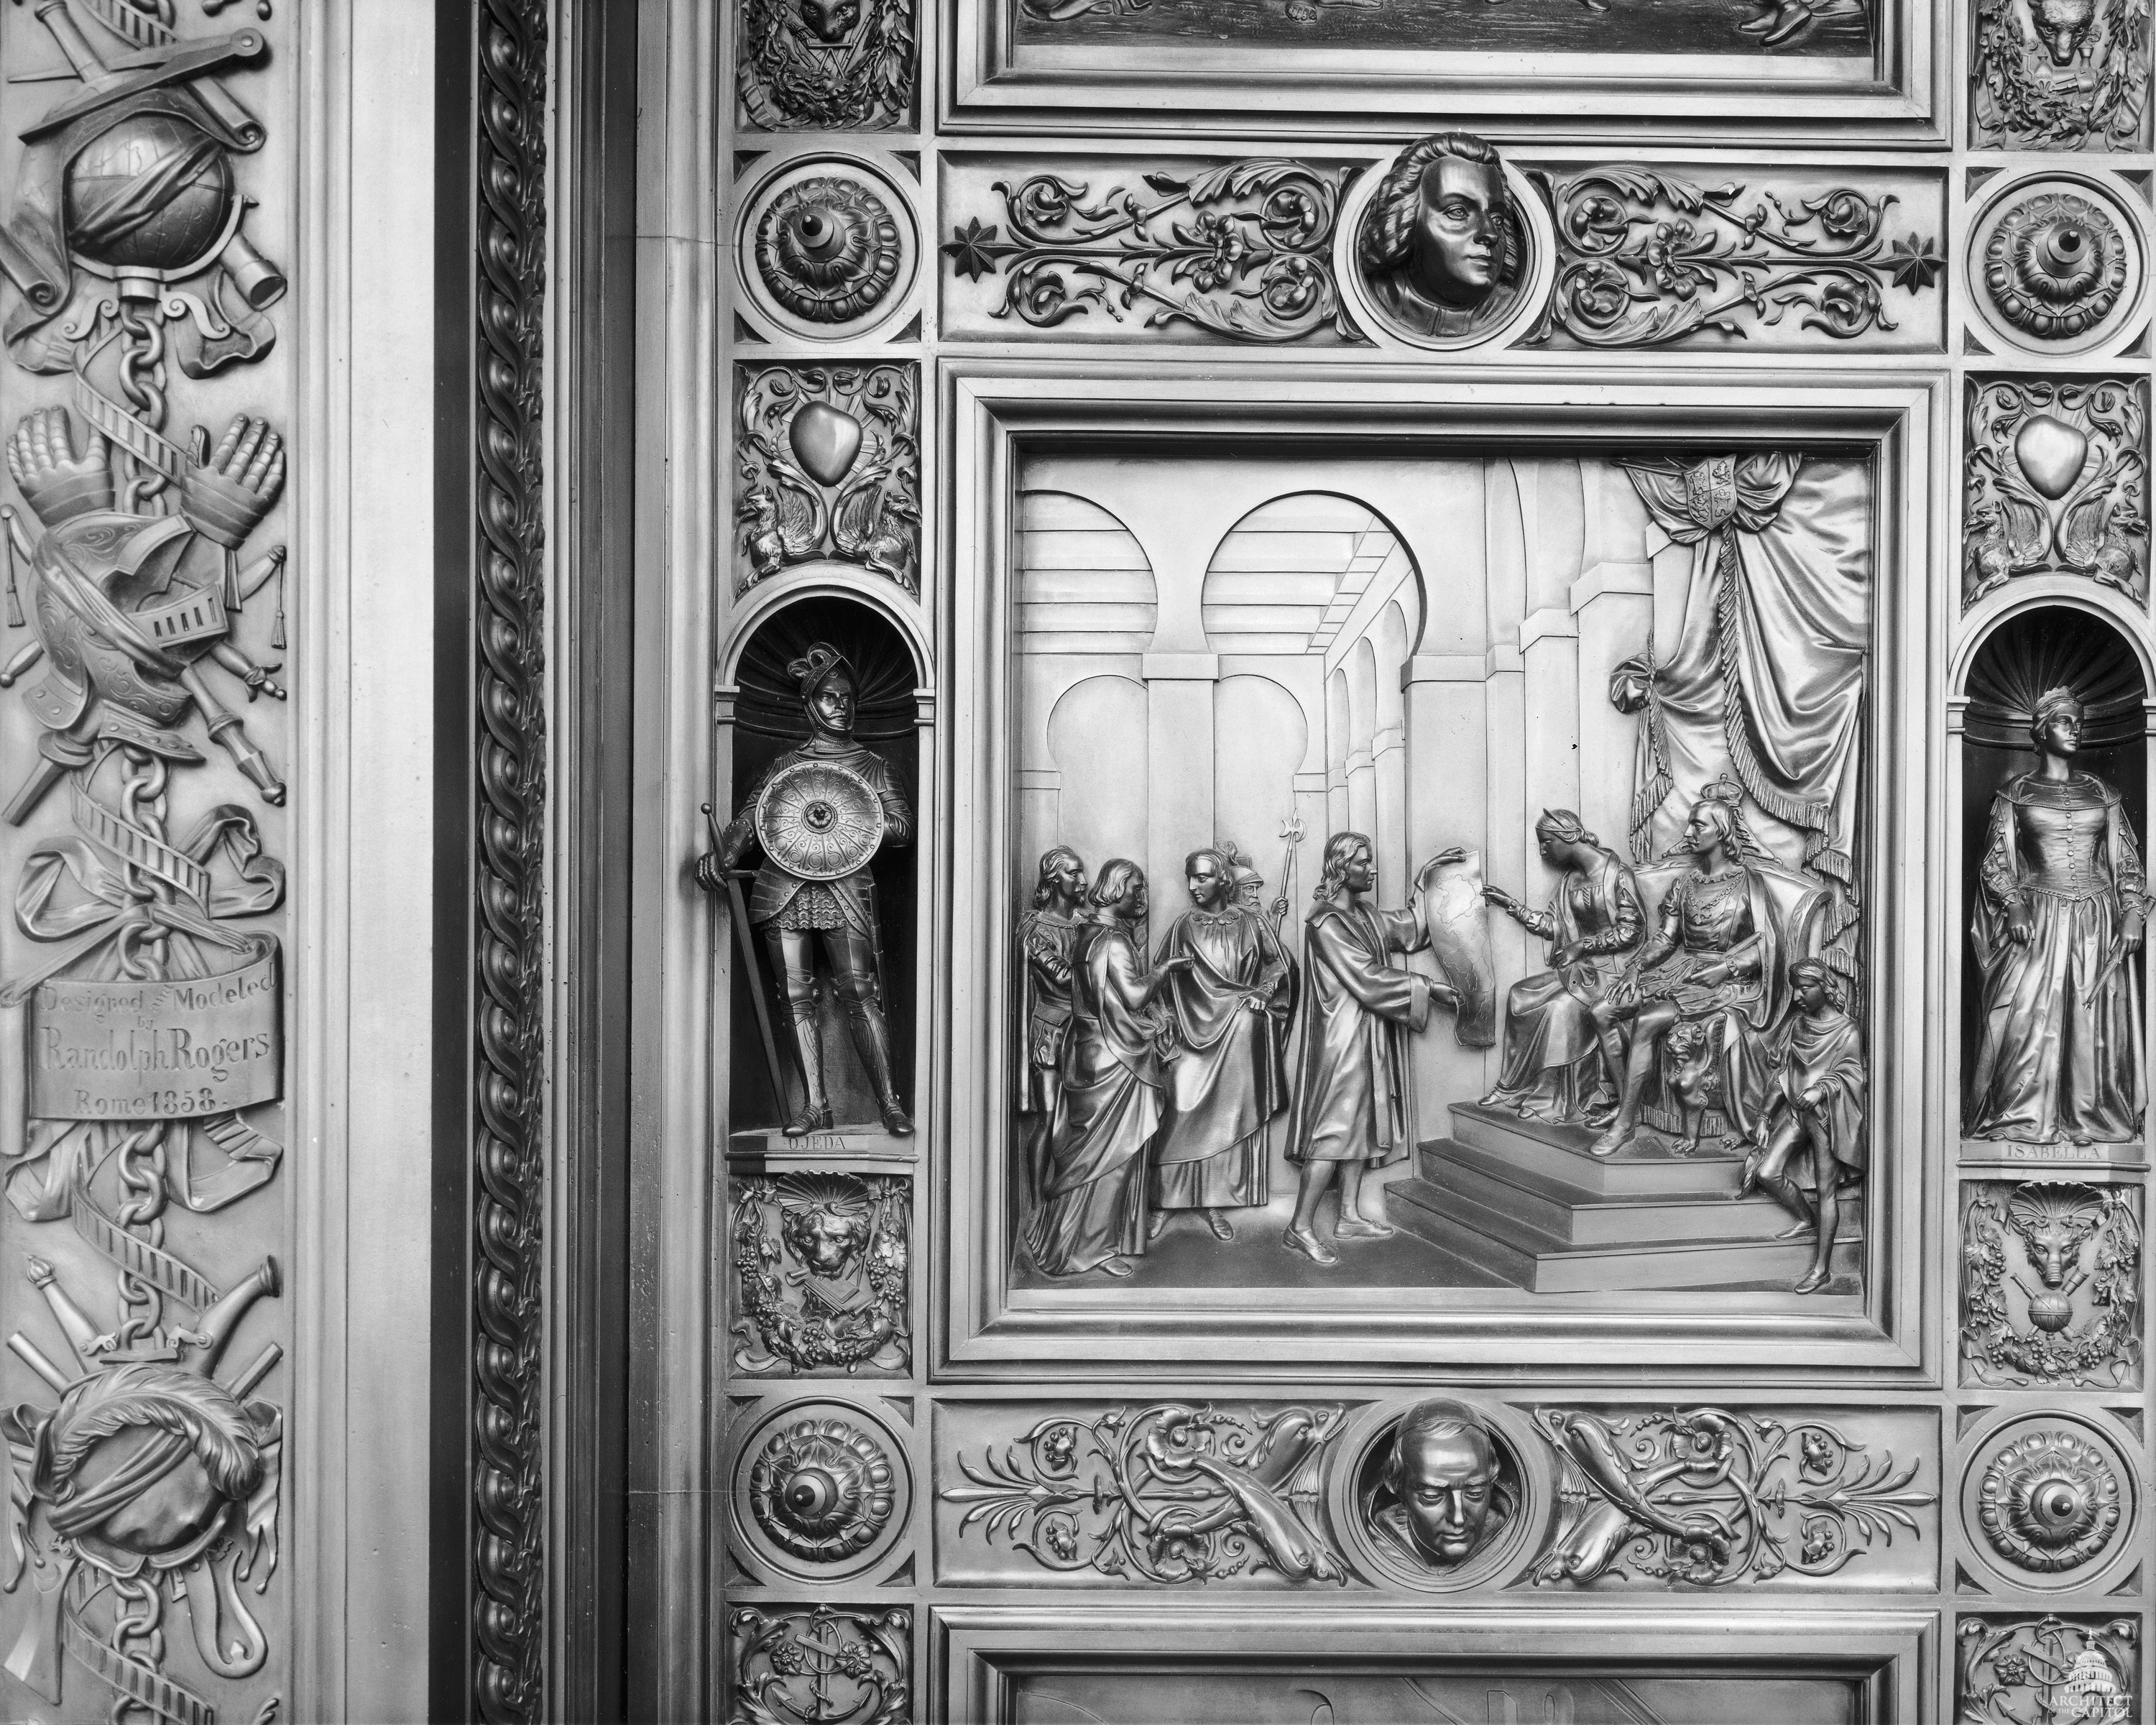 This panel of the Columbus Doors depicts Queen Isabella listening attentively to Columbus's explanation of his map, with King Ferdinand at her side.